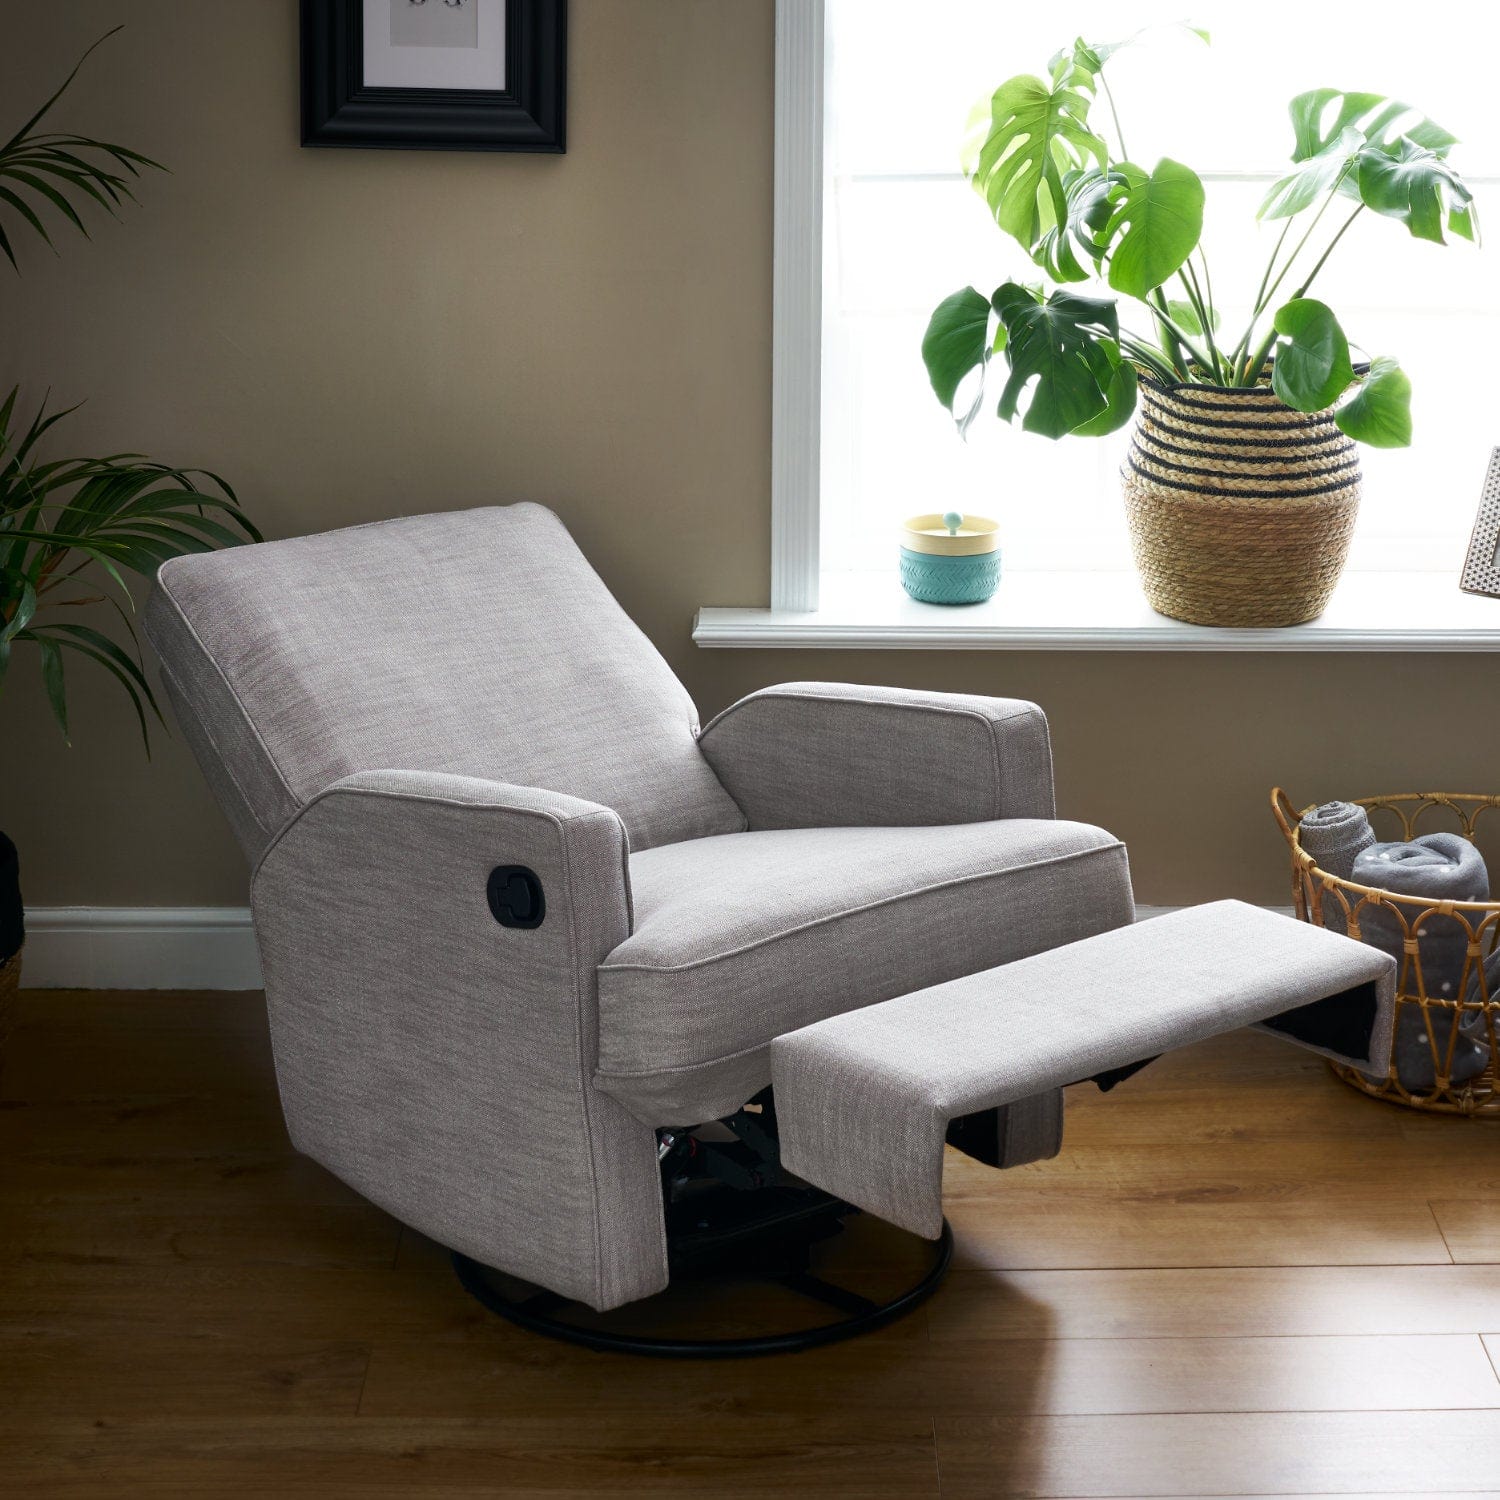 Obaby Nursery Furniture Obaby - Madison Swivel Glider Recliner Chair - Direct Delivery